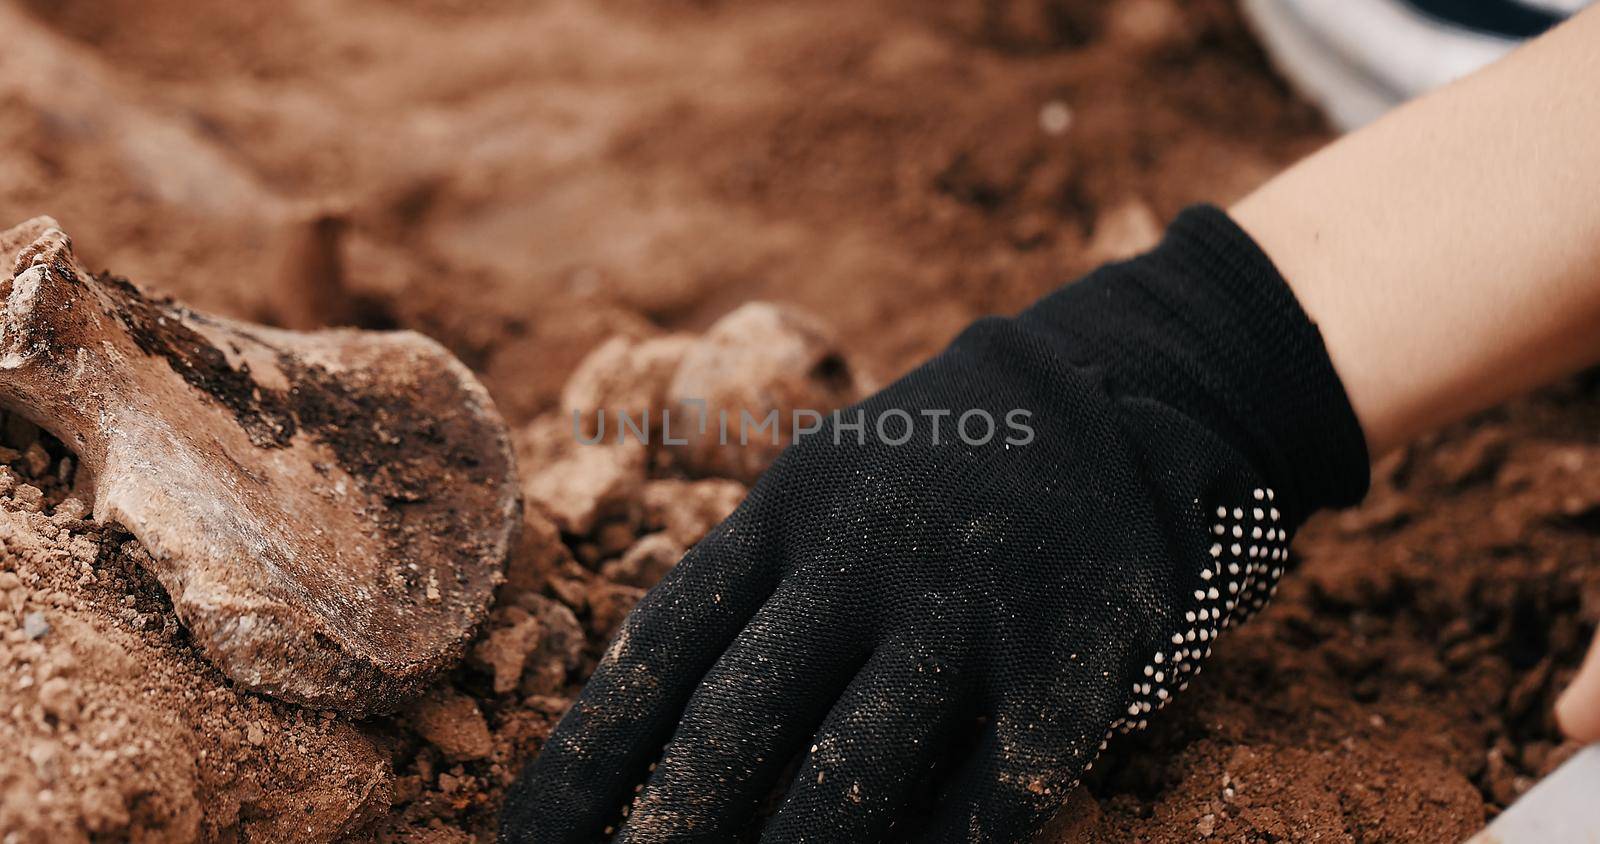 Archaeological excavations at the crime scene, Human remains in the ground. War crime scene. Site of a mass shooting of people. Human remains - bones of skeleton, skulls by EvgeniyQW